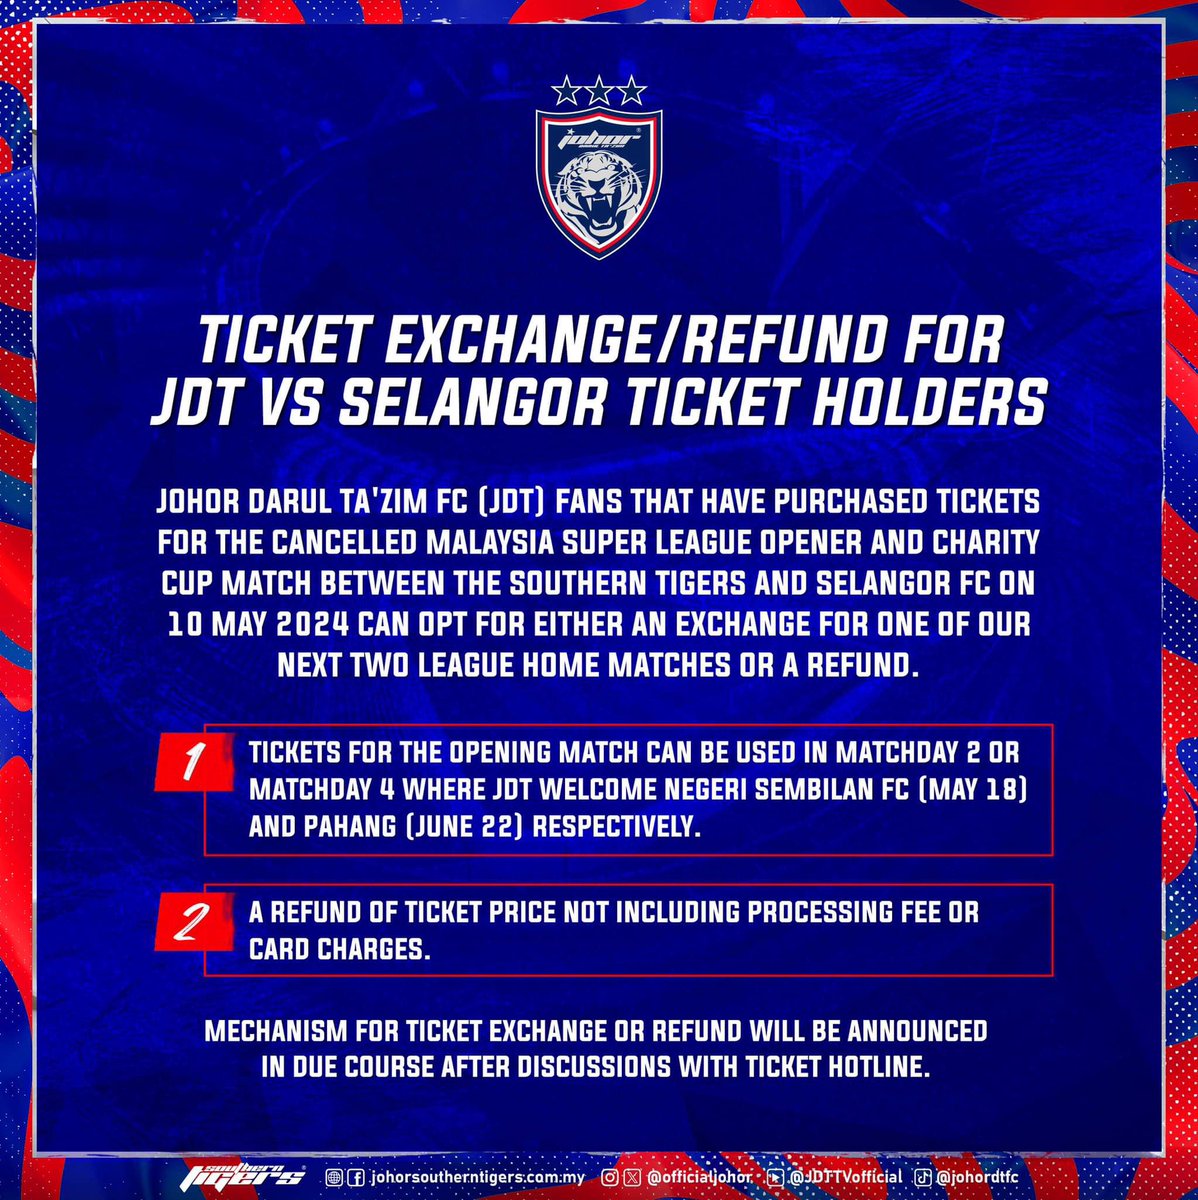 TICKET EXCHANGE/REFUND FOR JDT VS SELANGOR TICKET HOLDERS Johor Darul Ta'zim FC (JDT) fans that have purchased tickets for the cancelled Malaysia Super League opener and Charity Cup match between the Southern Tigers and Selangor FC on 10 May 2024 can opt for either an exchange